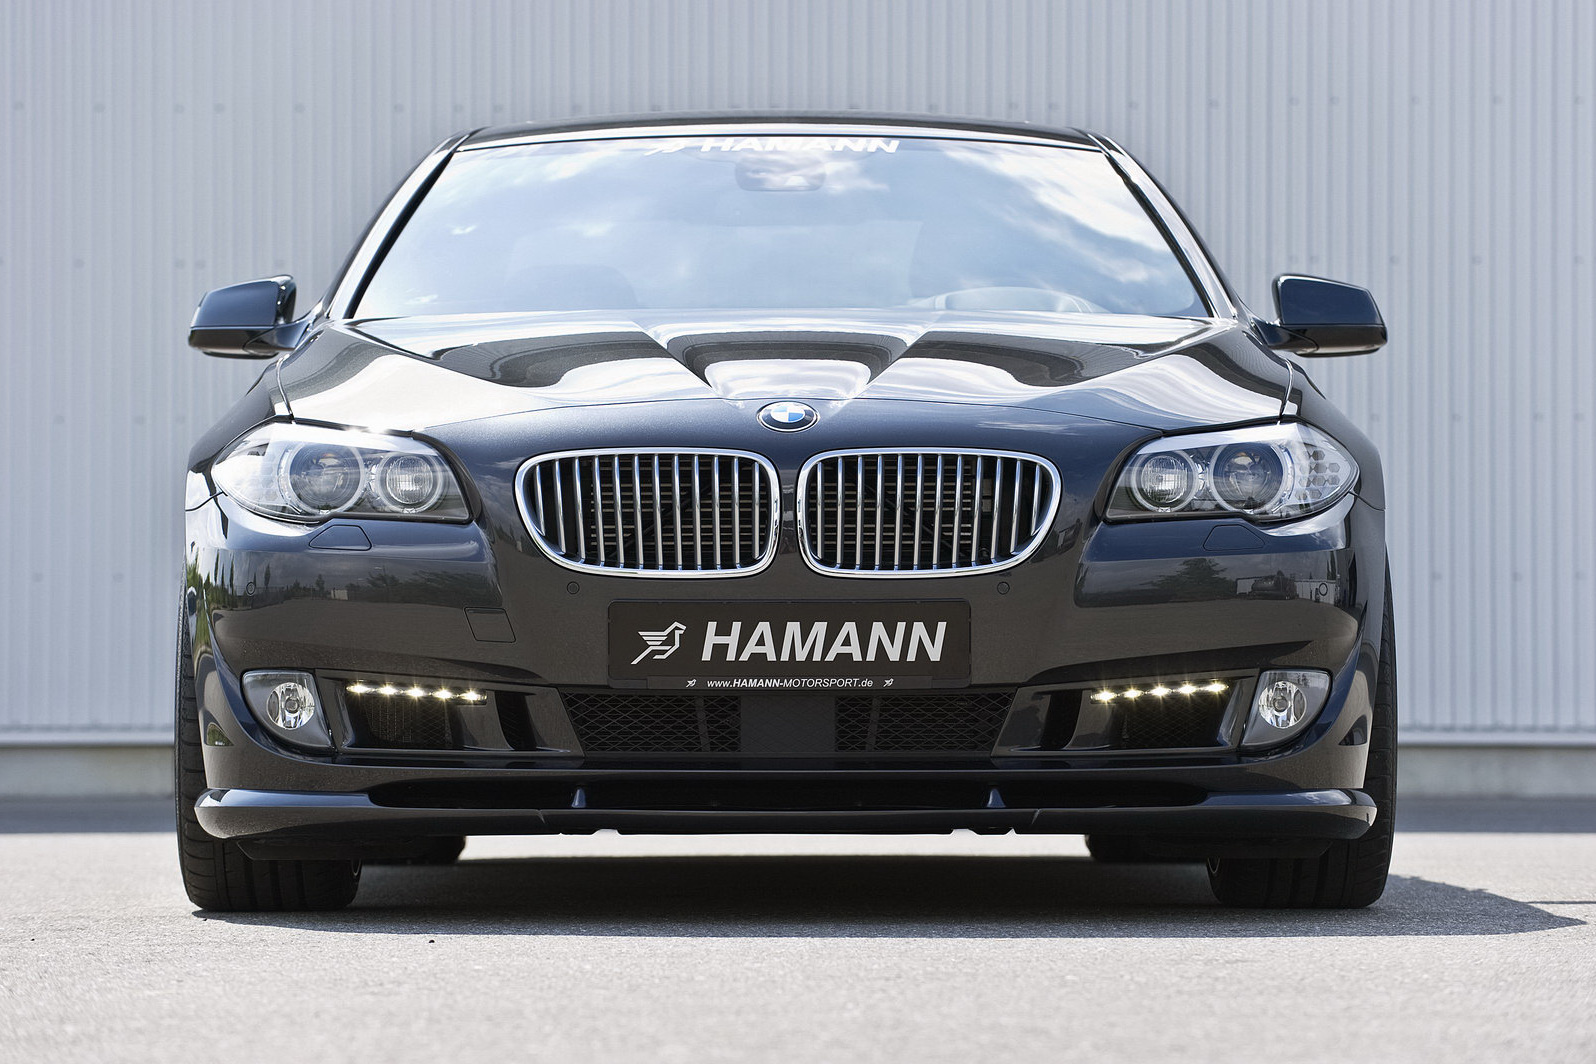 Hamann Motorsport on X: Our tuning program for BMW 5 Series G31. How do  you like the tuning package for the Touring? #hamann #tuning #bmw5er #G31   / X